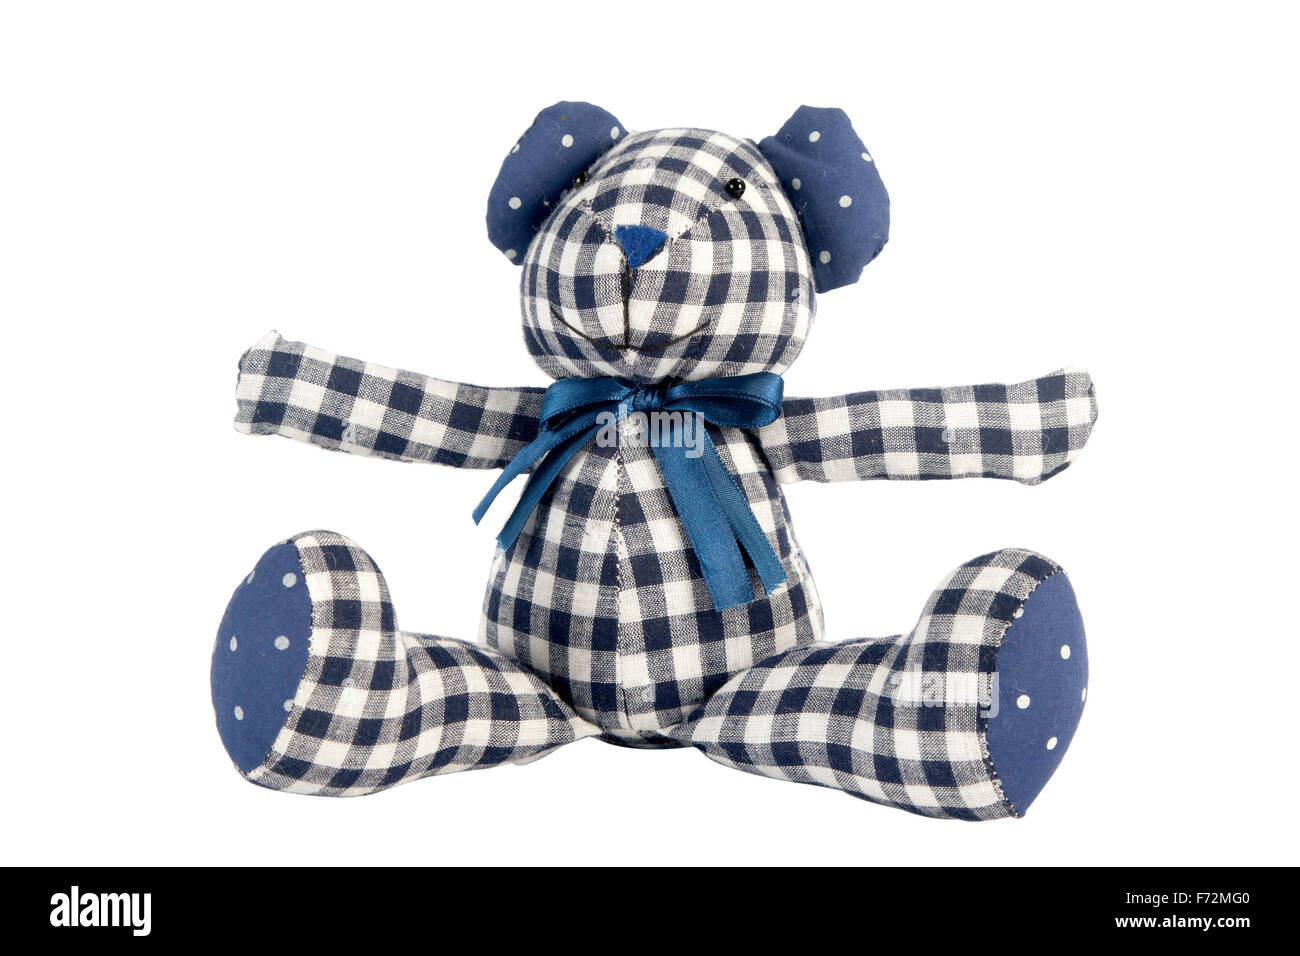 Teddy Bear toy isolated on white, Pattern Fabric Stock Photo